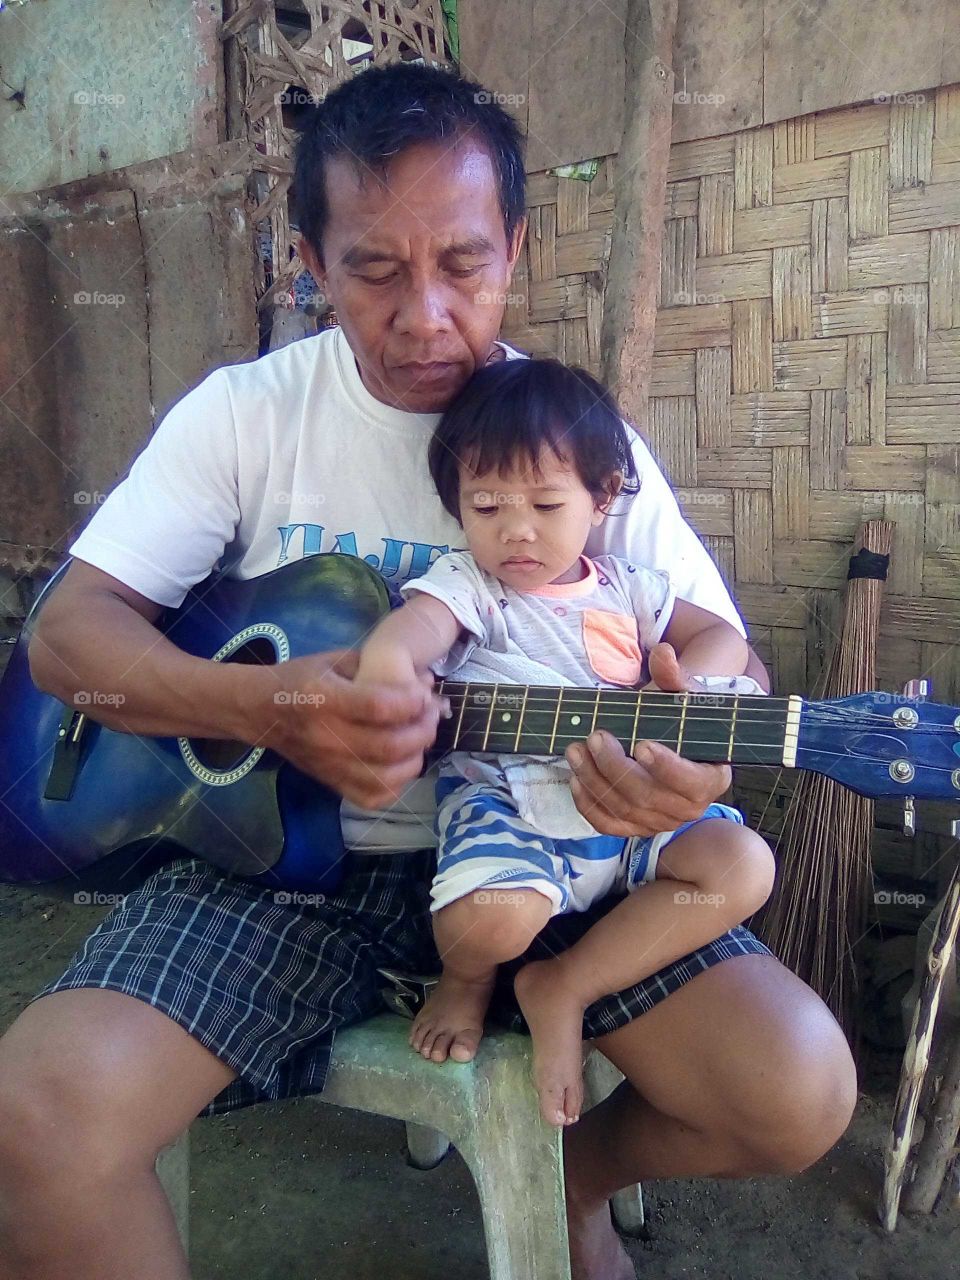 My father is trying to show my baby sister how to strum the guitar. It is good to see that they are interacting with one another.